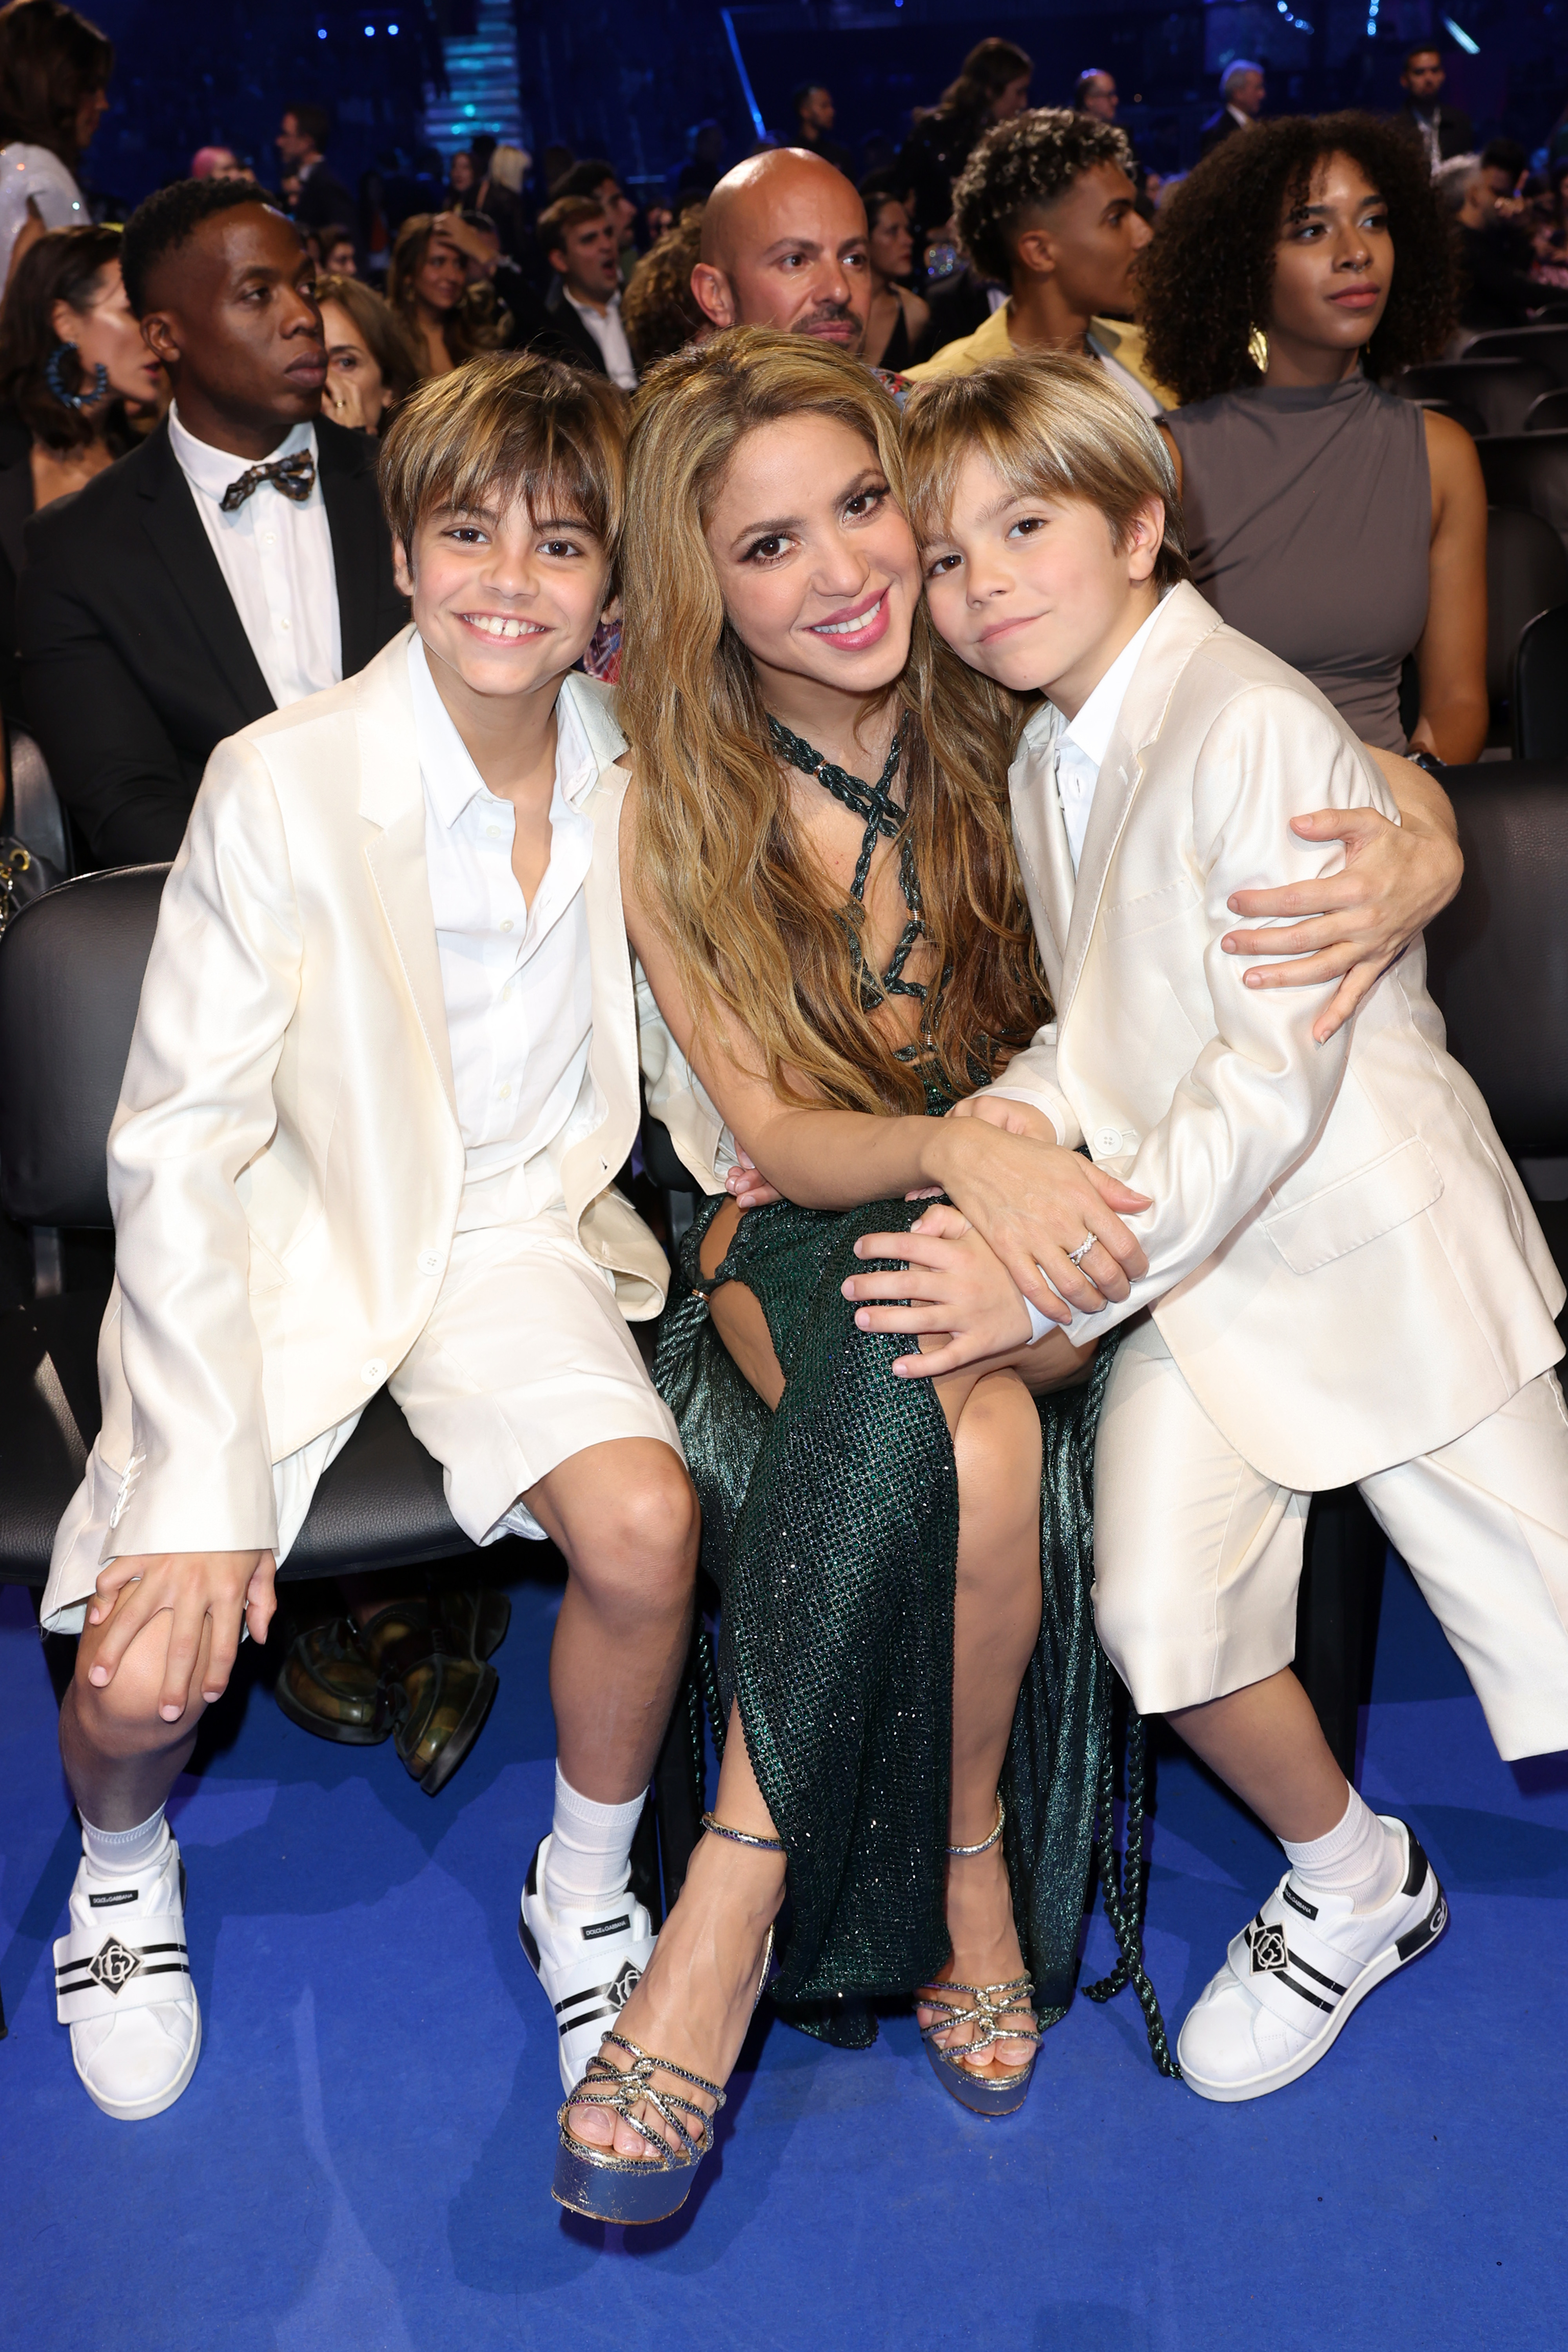 Shakira seated with her two boys in formal wear at an event, all smiling for the camera